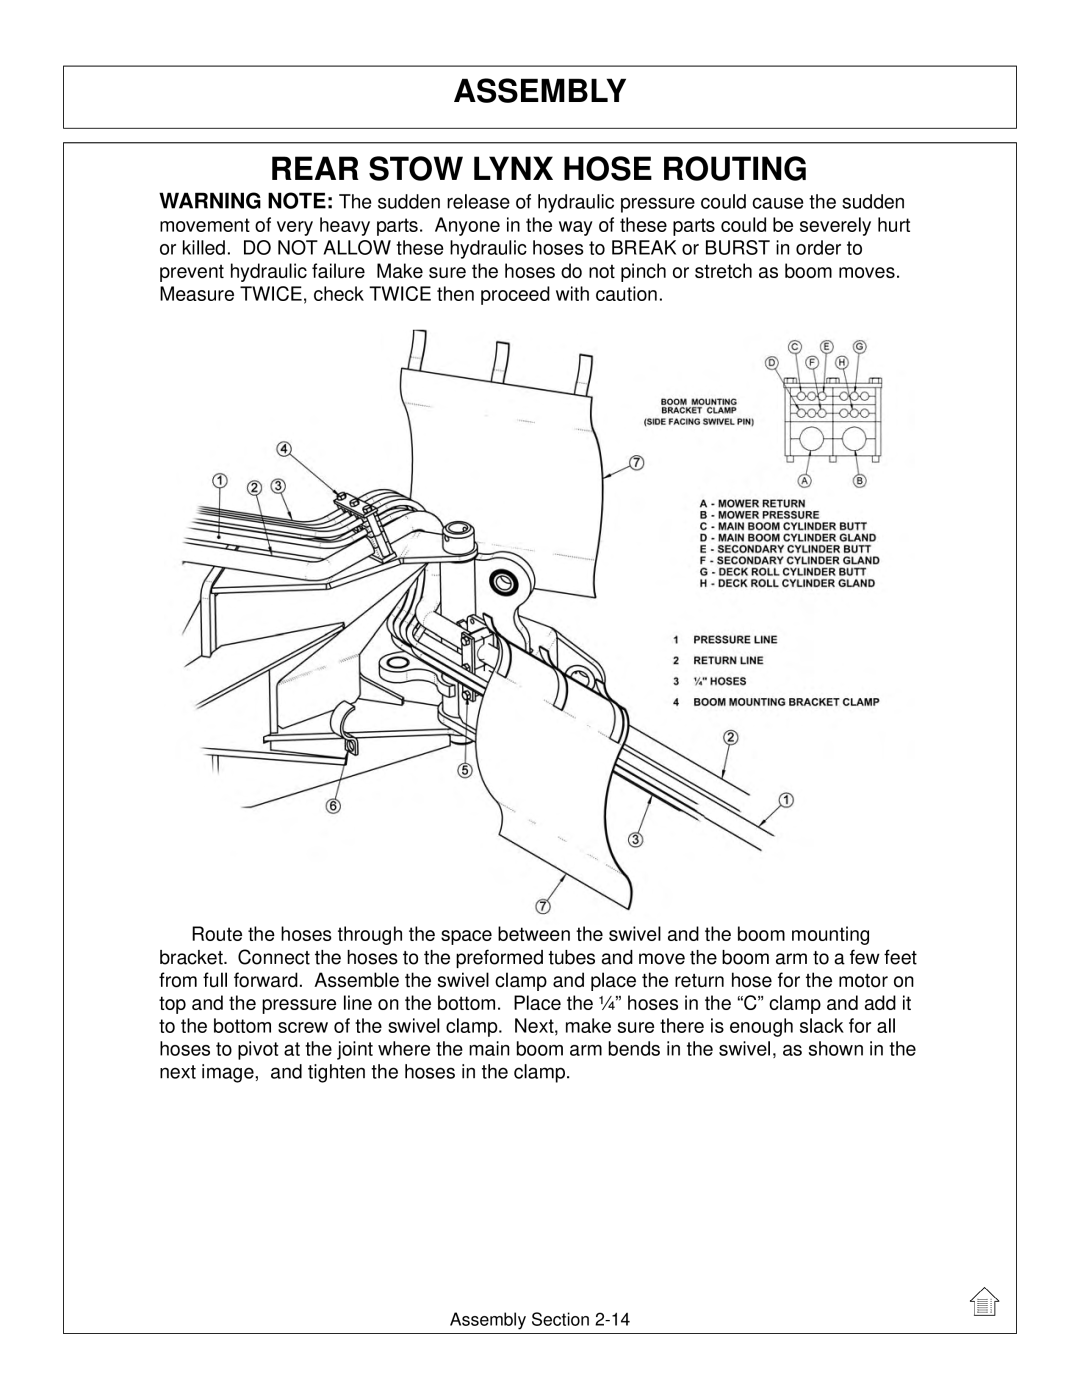 Tiger Products Co., Ltd 5093E, 5083E, 5101E manual Assembly Rear Stow Lynx Hose Routing 